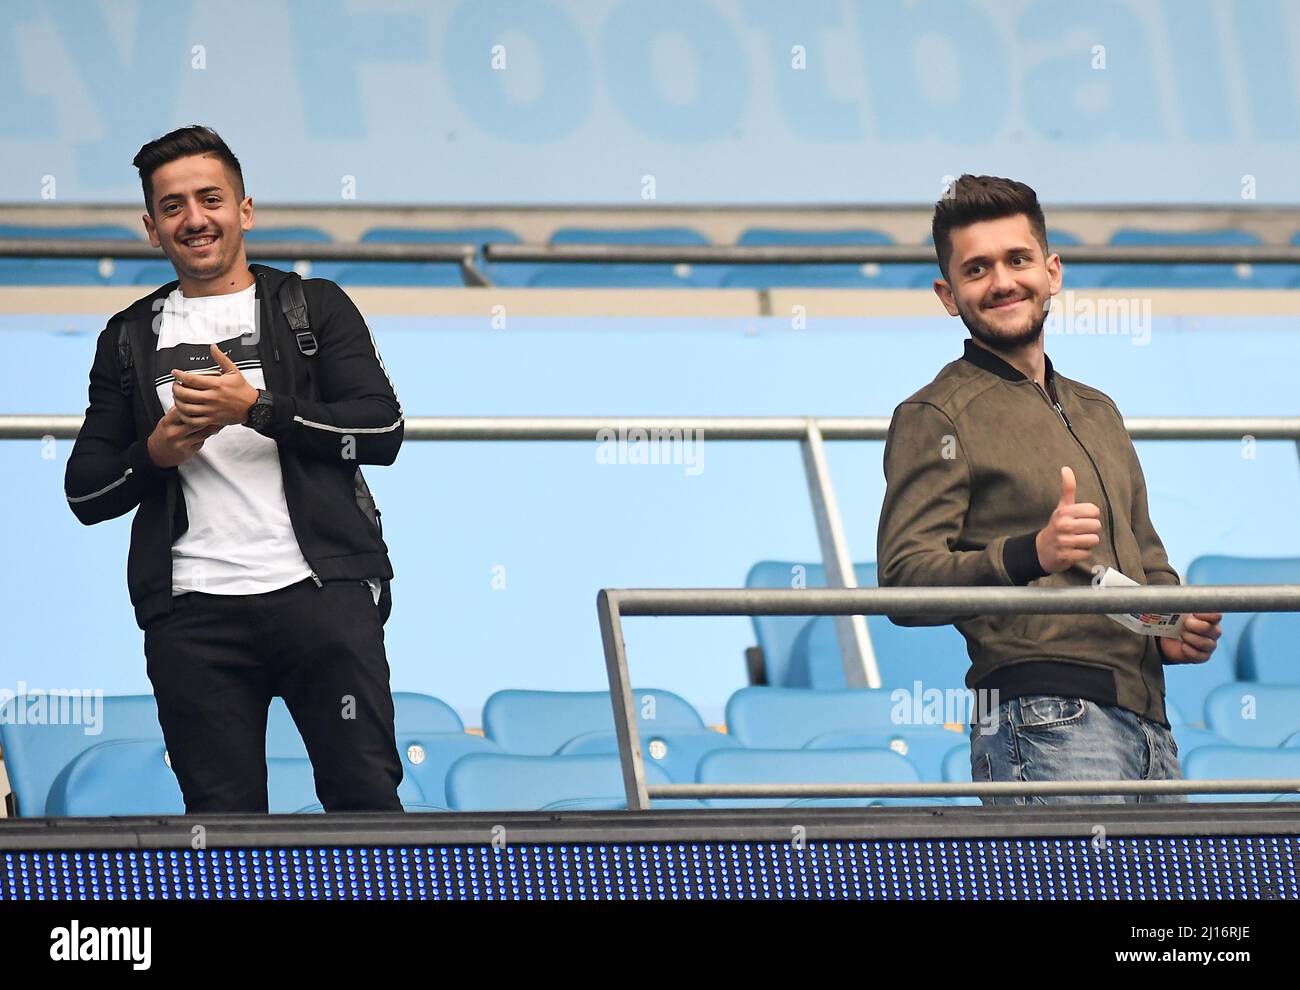 MANCHESTER, ENGLAND - AUGUST 24, 2016: Two fans pictured prior to the second leg of the 2016/17 UEFA Champions League tie between Manchester City (Engalnd) and FCSB (Romania) at Etihad Stadium. Copyright: Cosmin Iftode/Picstaff Stock Photo